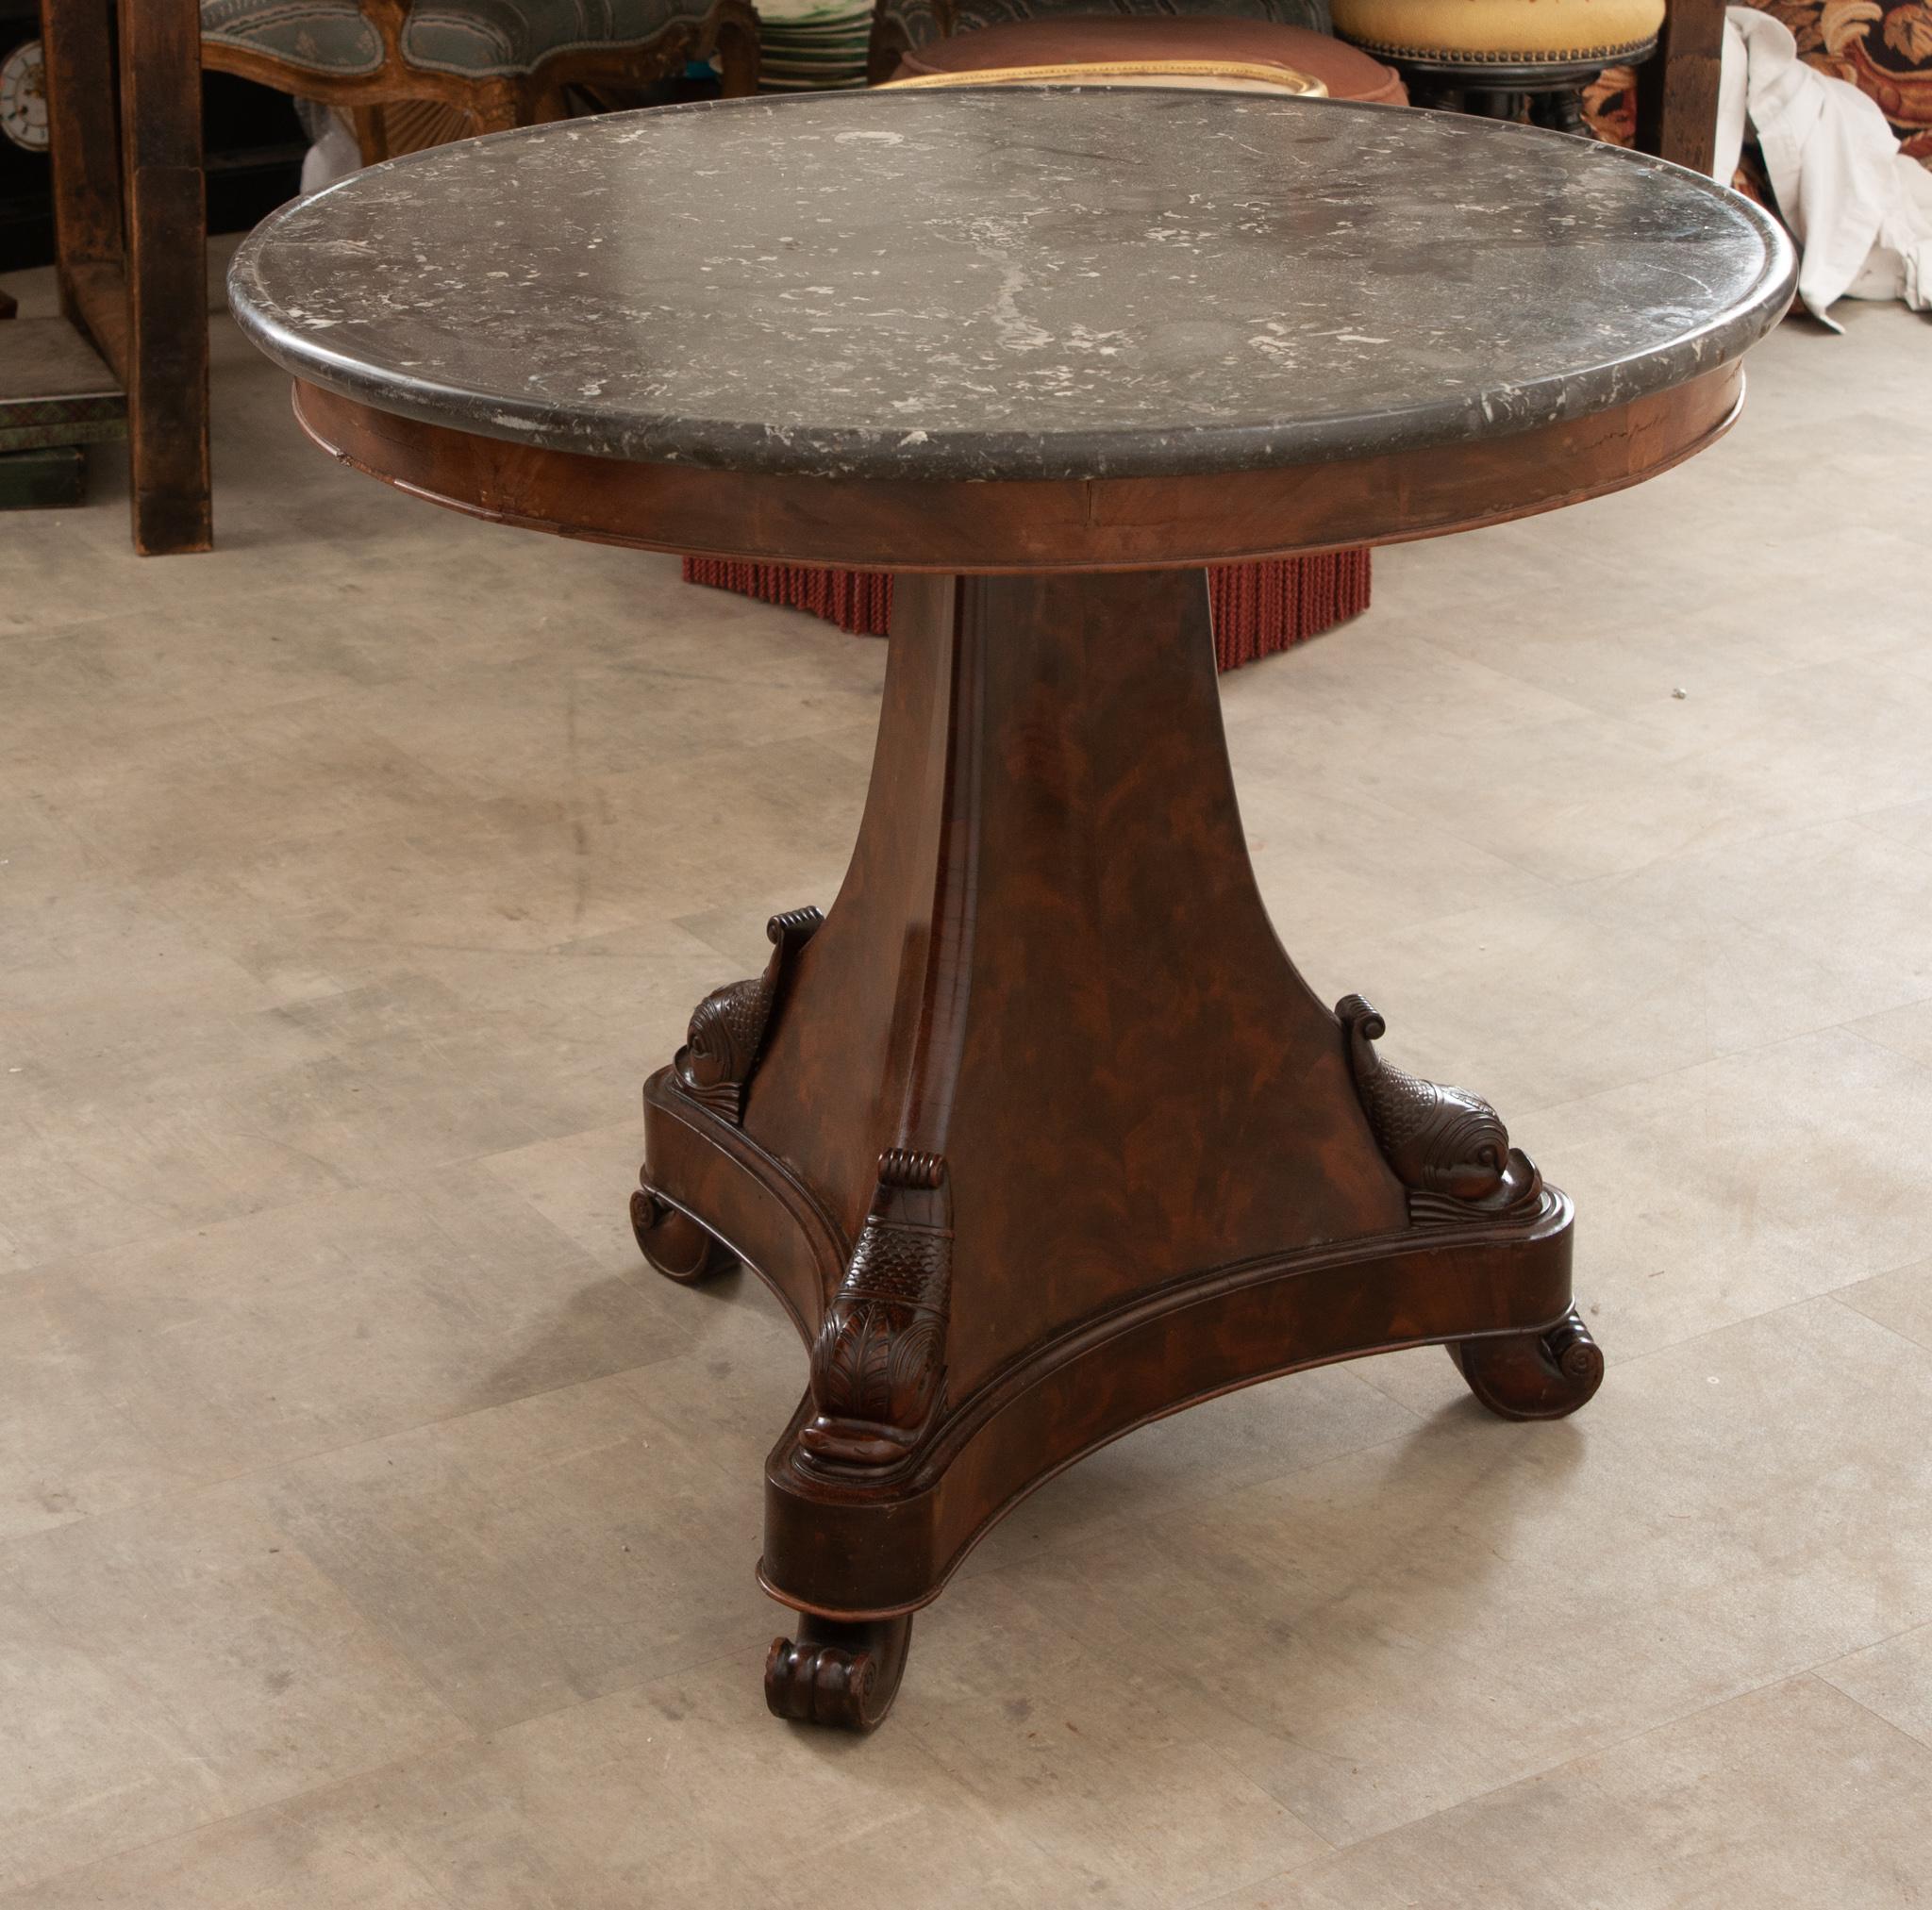 A quality French 19th Century Restauration style center table. Its sublime round marble top with gorgeous gray and white inclusions and veining throughout sits atop a marvelous hand-crafted mahogany trefoil stand that displays volute detailing with